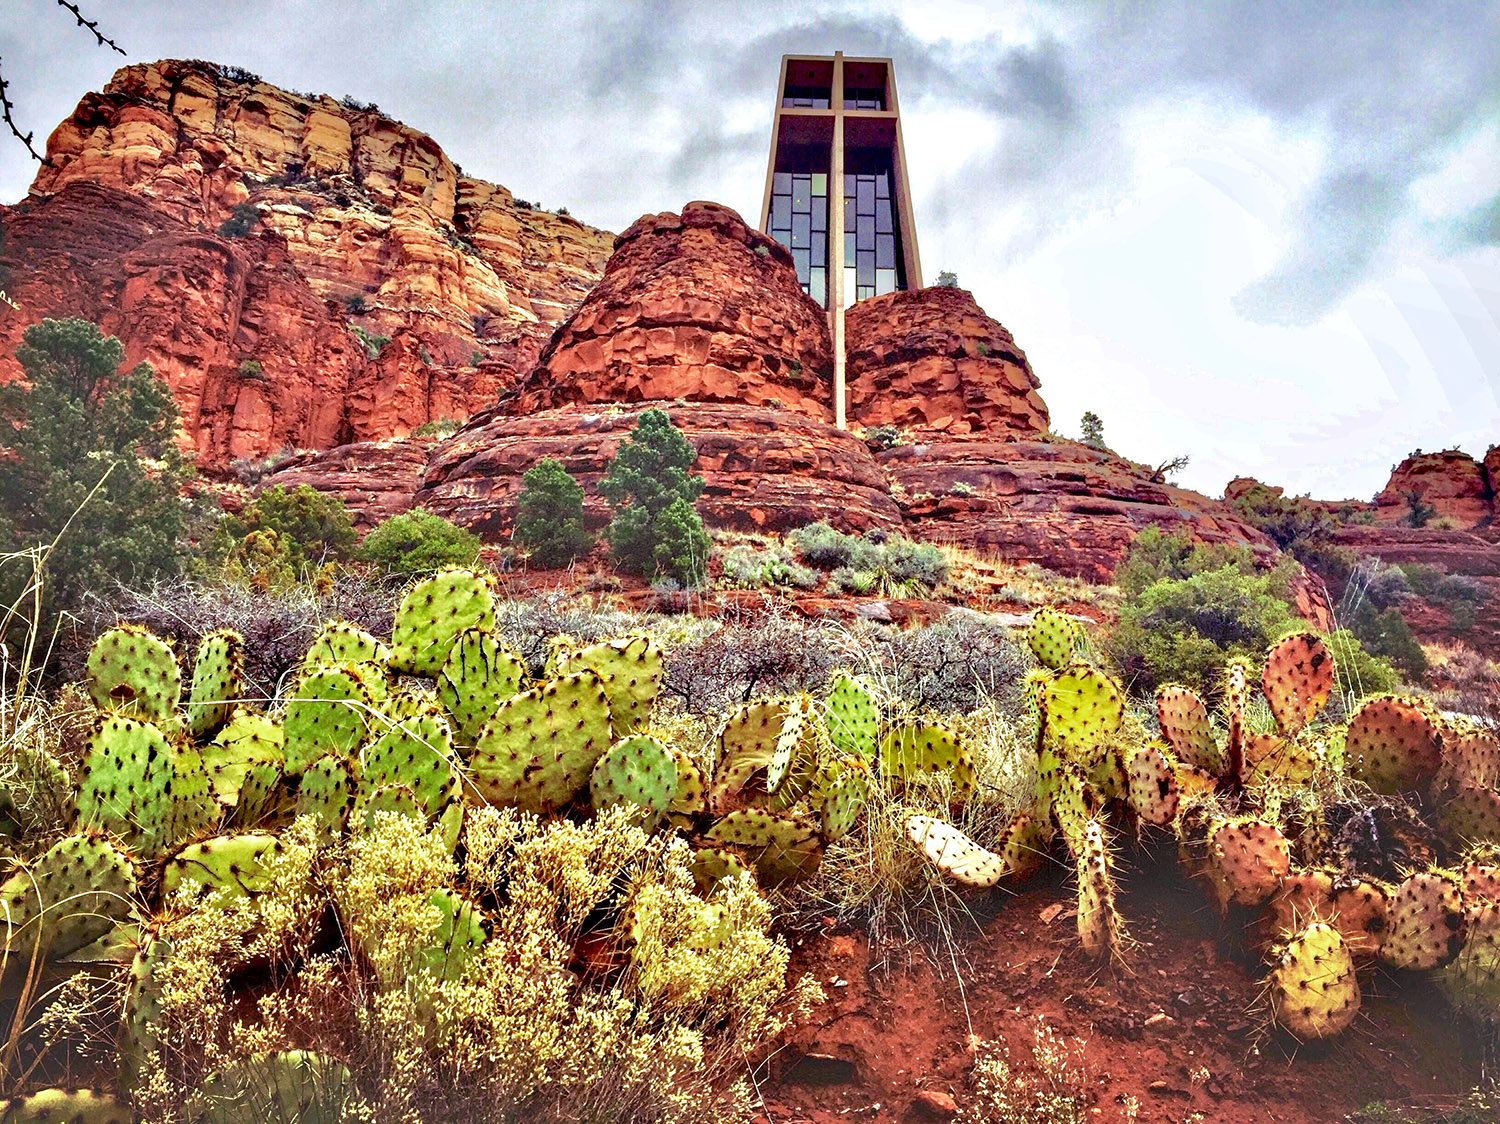 A cathedral-like structure rising among the red rocks of a mountain face.